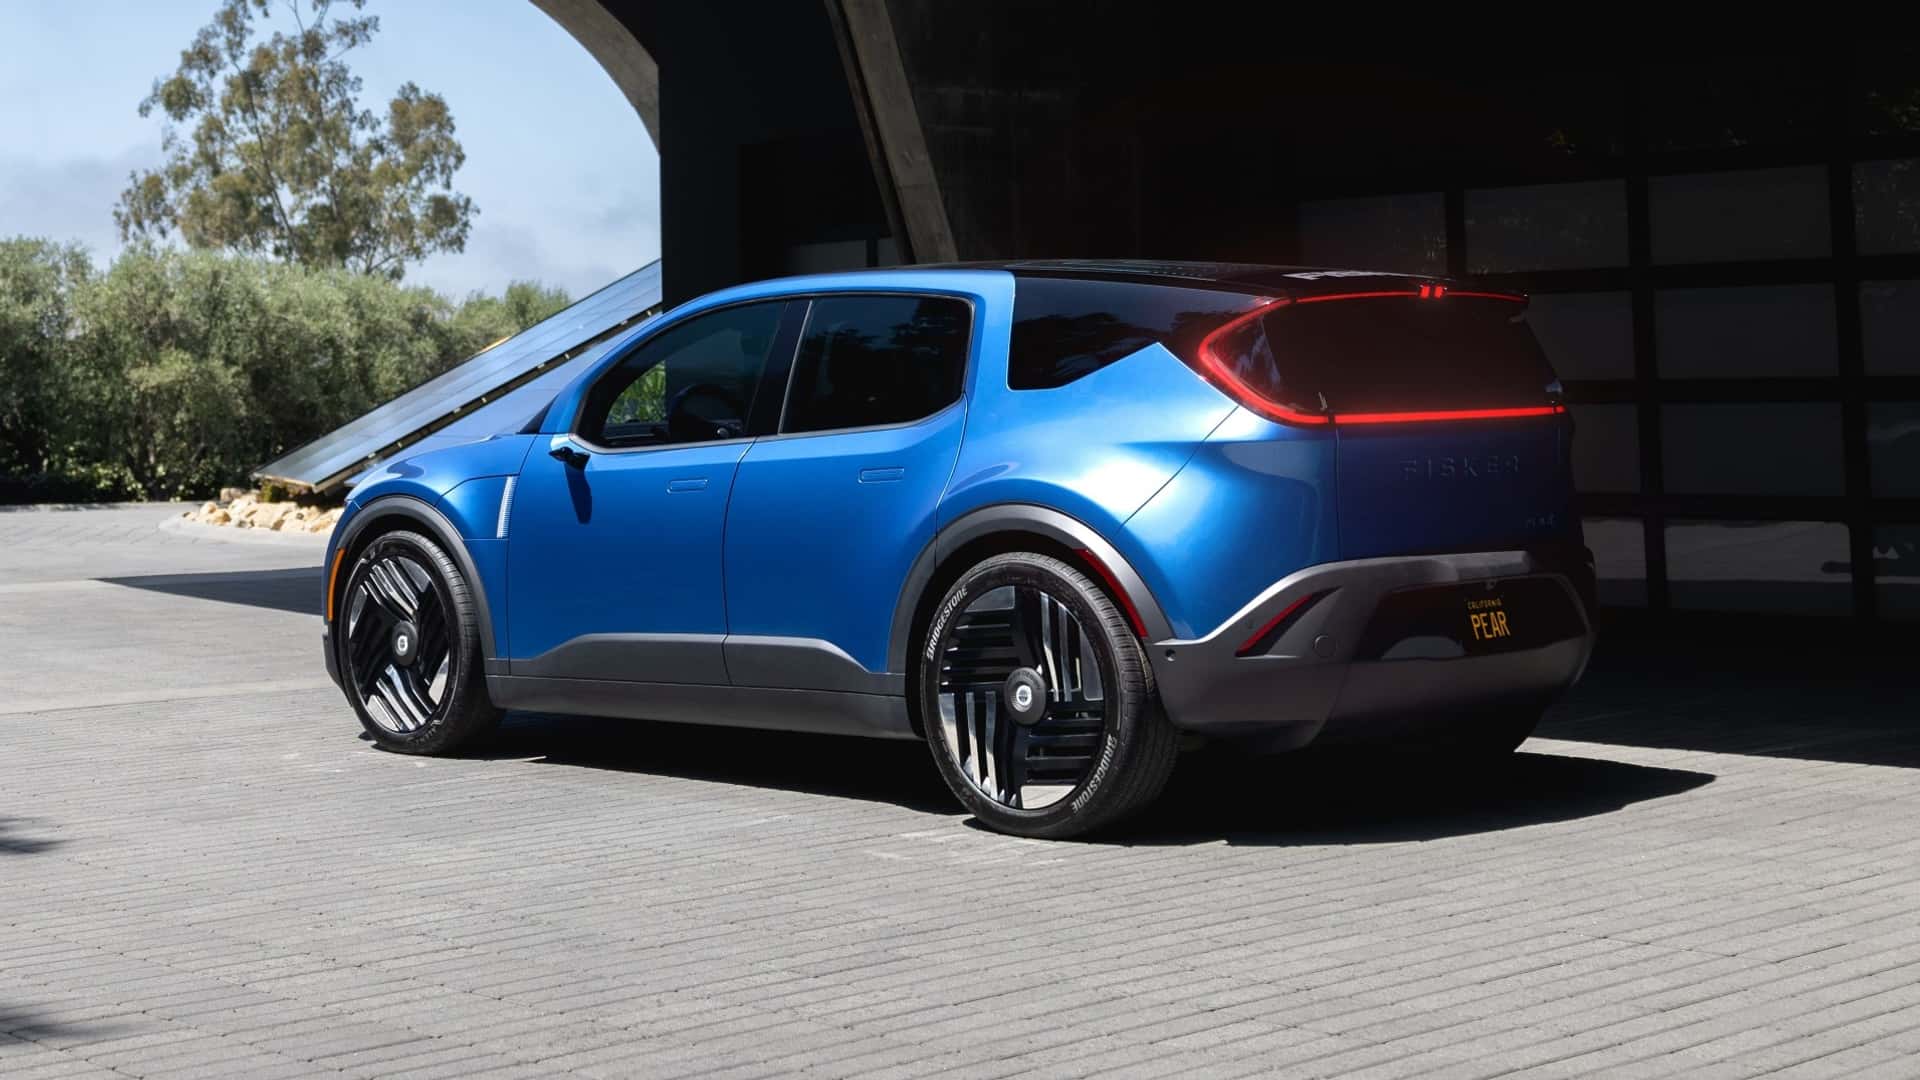 Fisker Pear electric crossover promises up to 320 miles of range